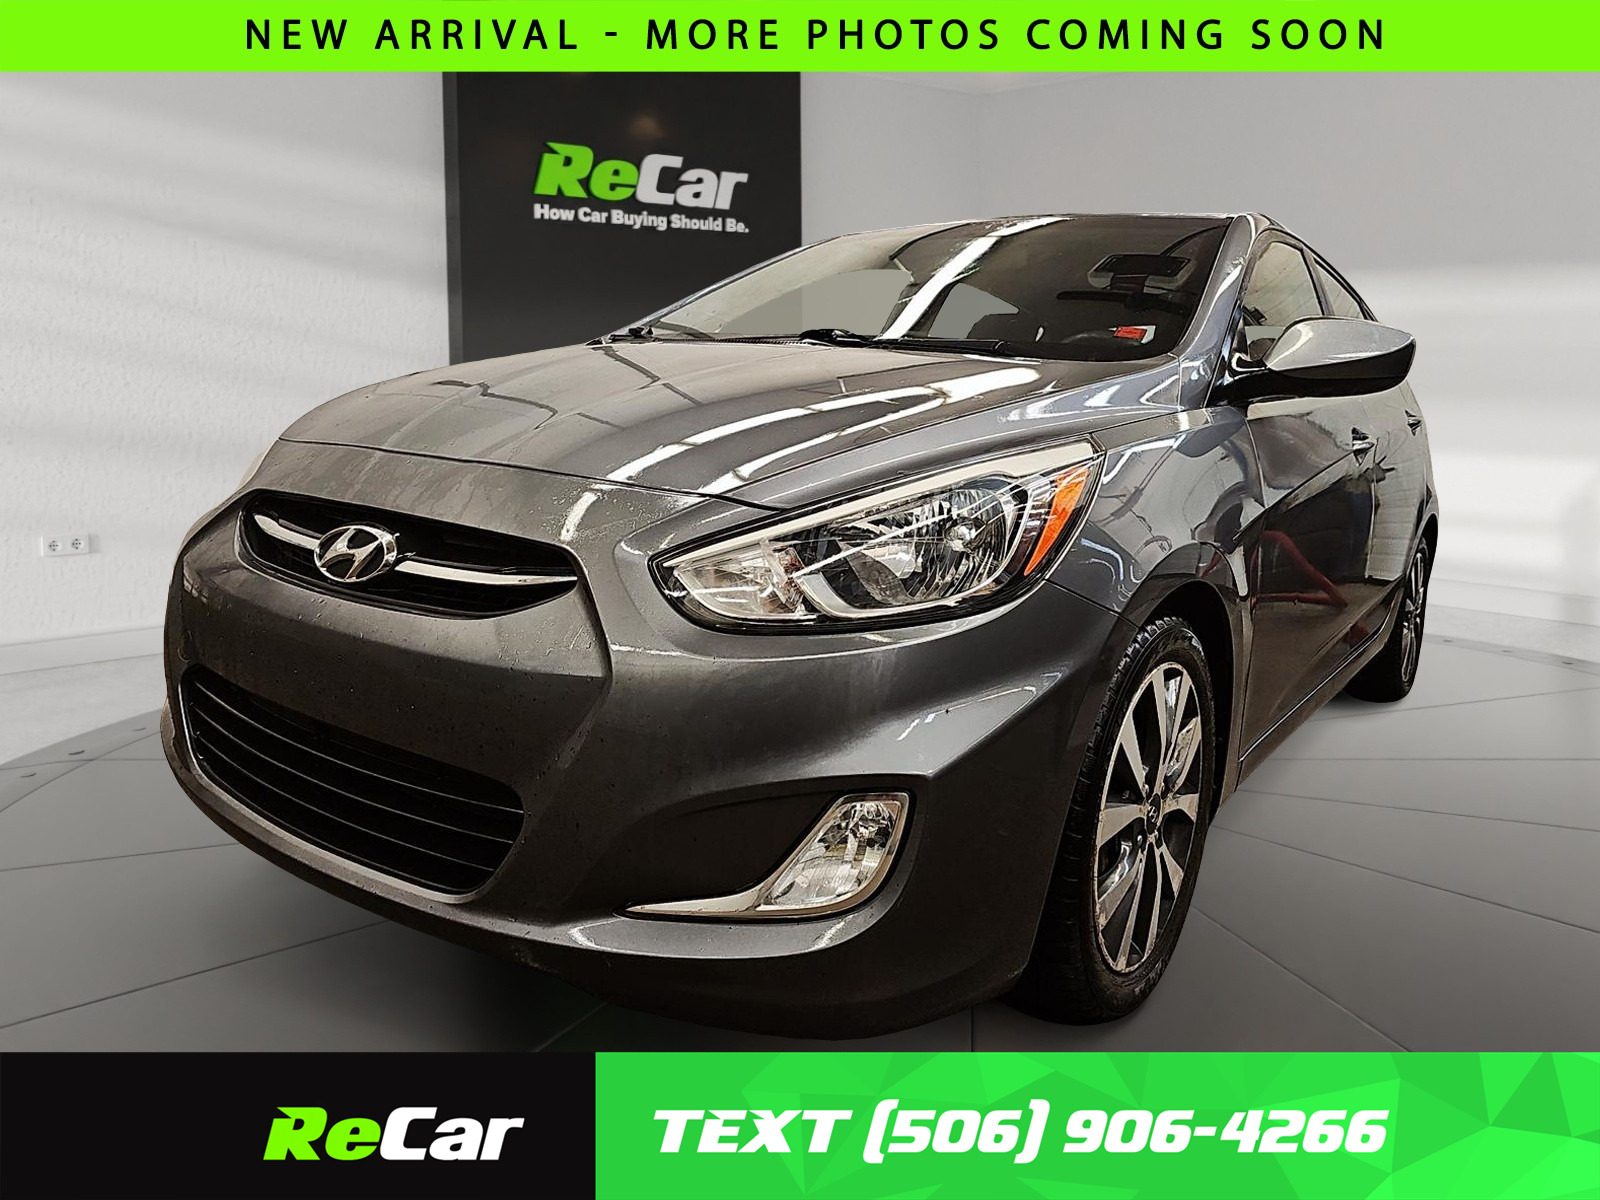 2015 Hyundai Accent Heated Seats | Air Conditioning